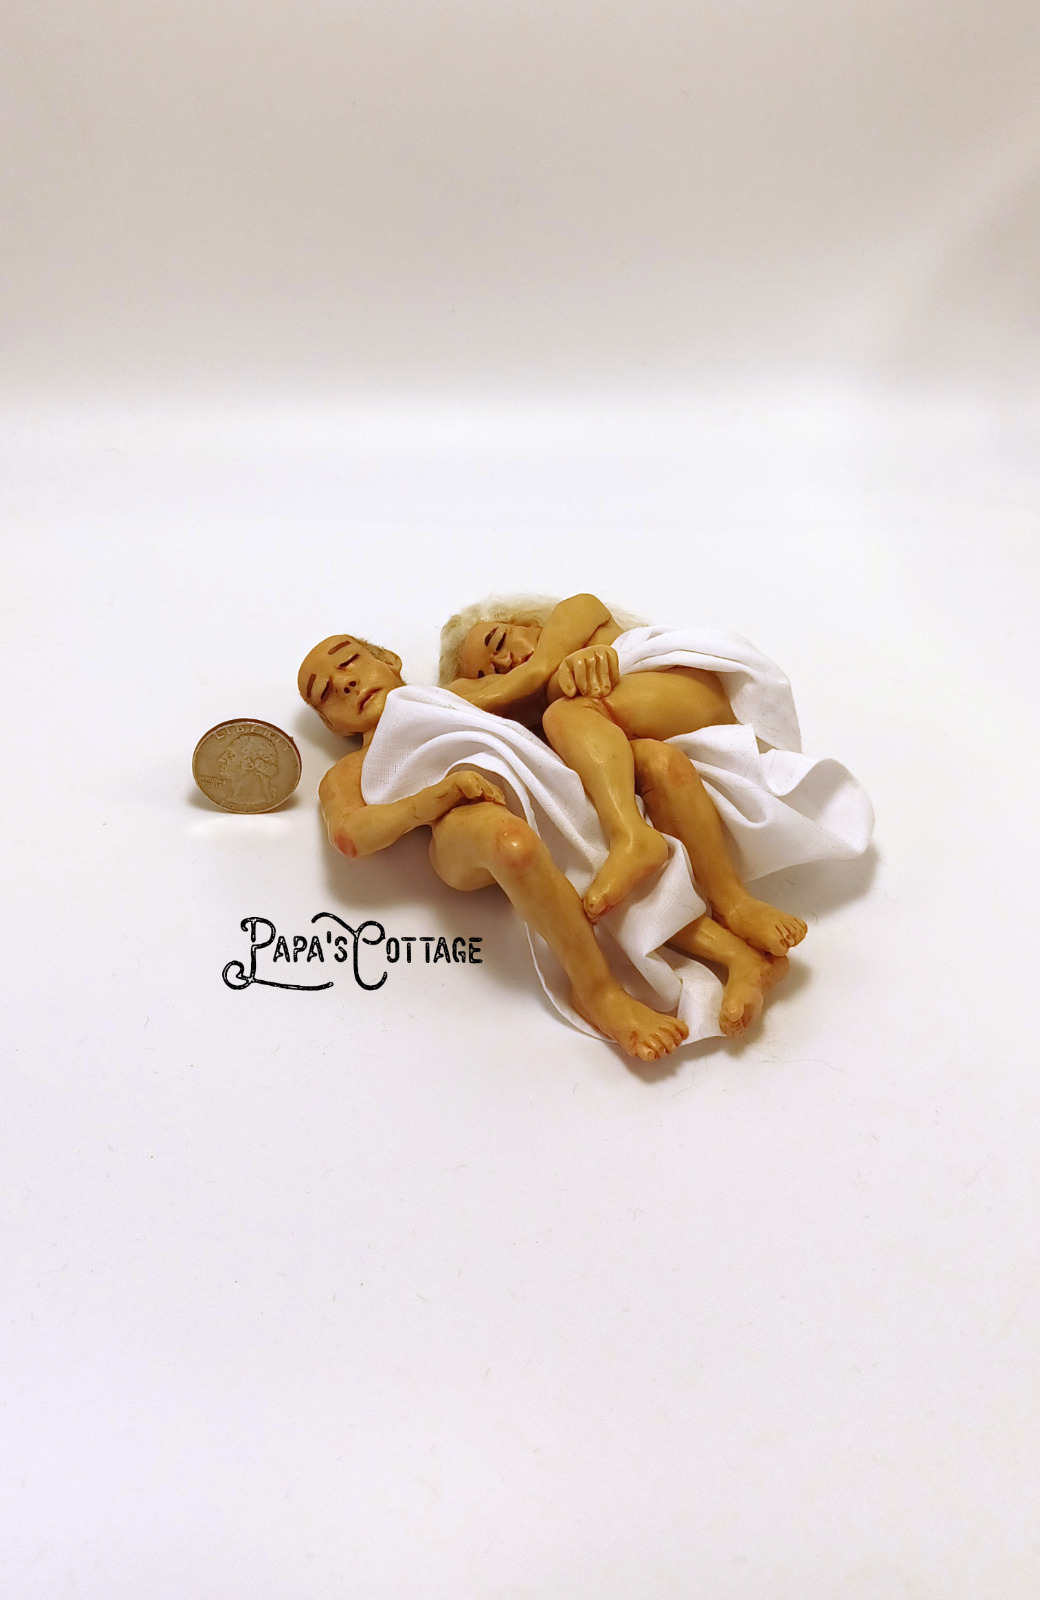 Enmeshed romantic couple for 1:12 scale dollhouse, sleeping lovers w sheet